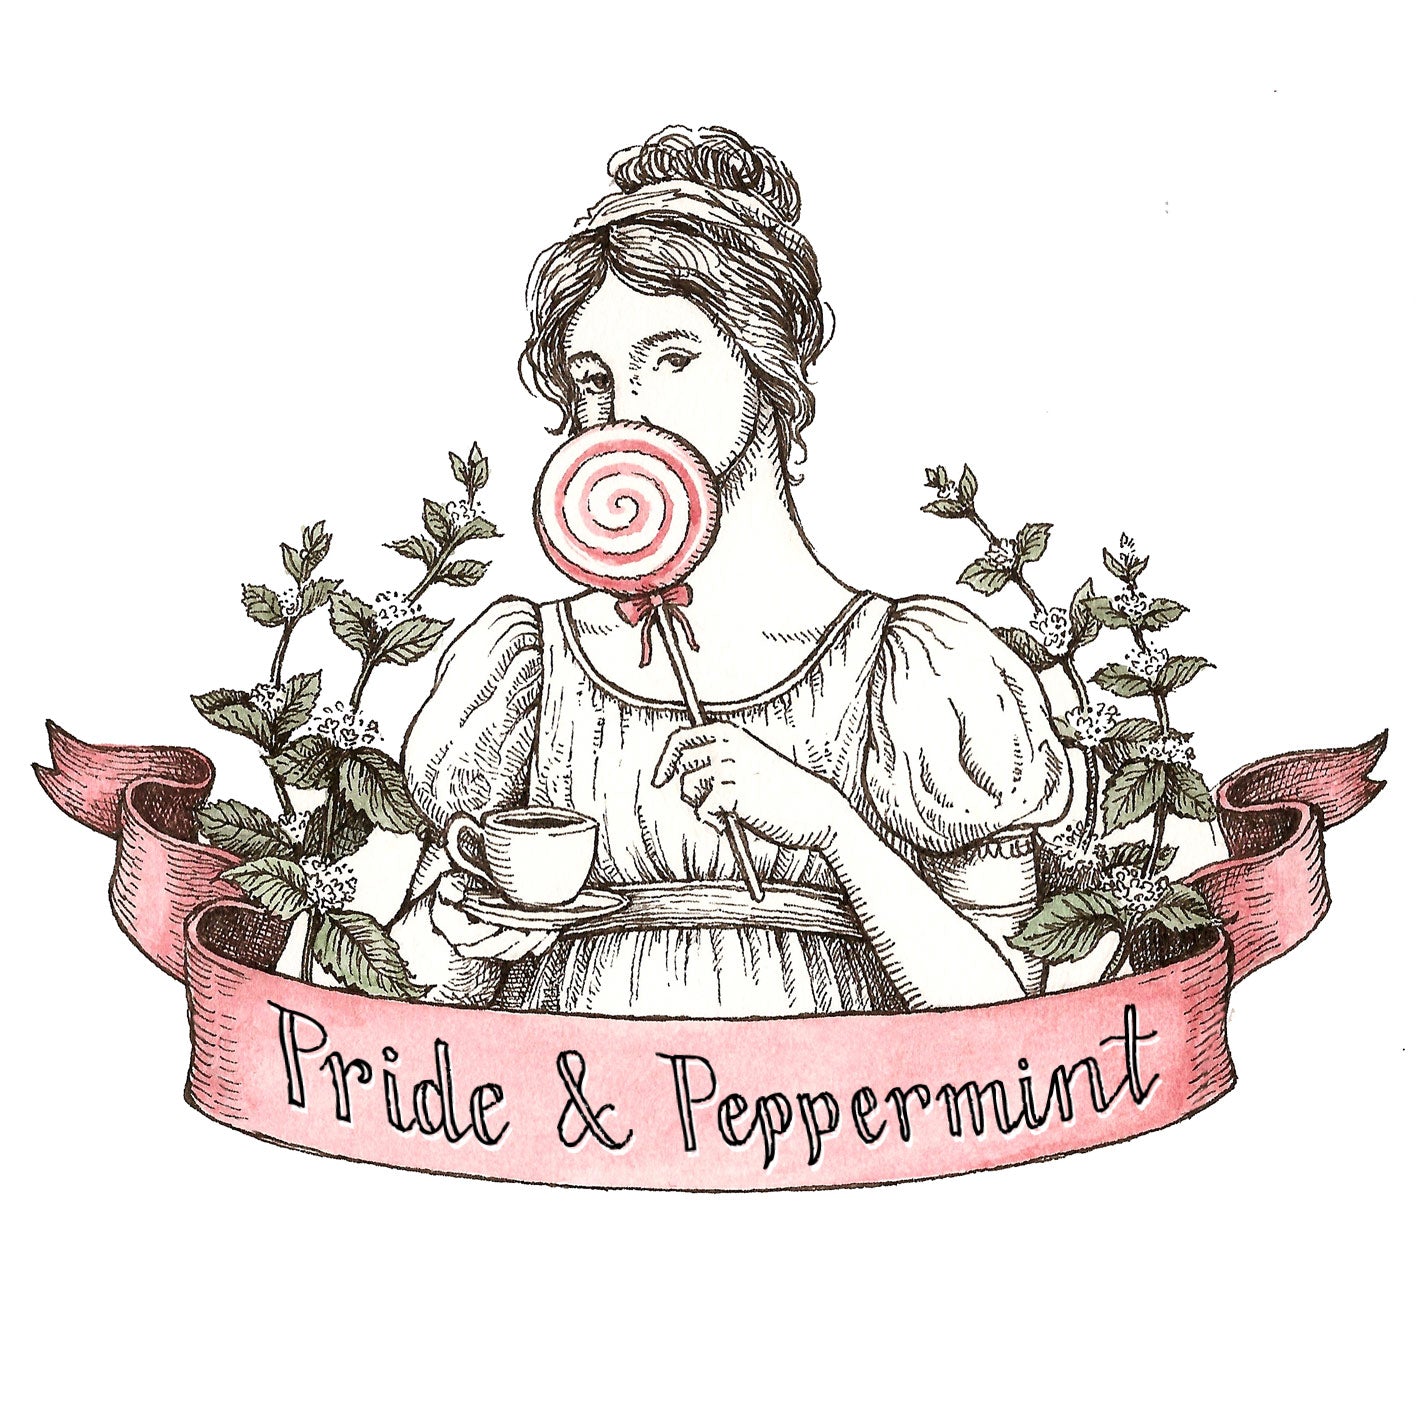 Pride and Peppermint - Coming soon!